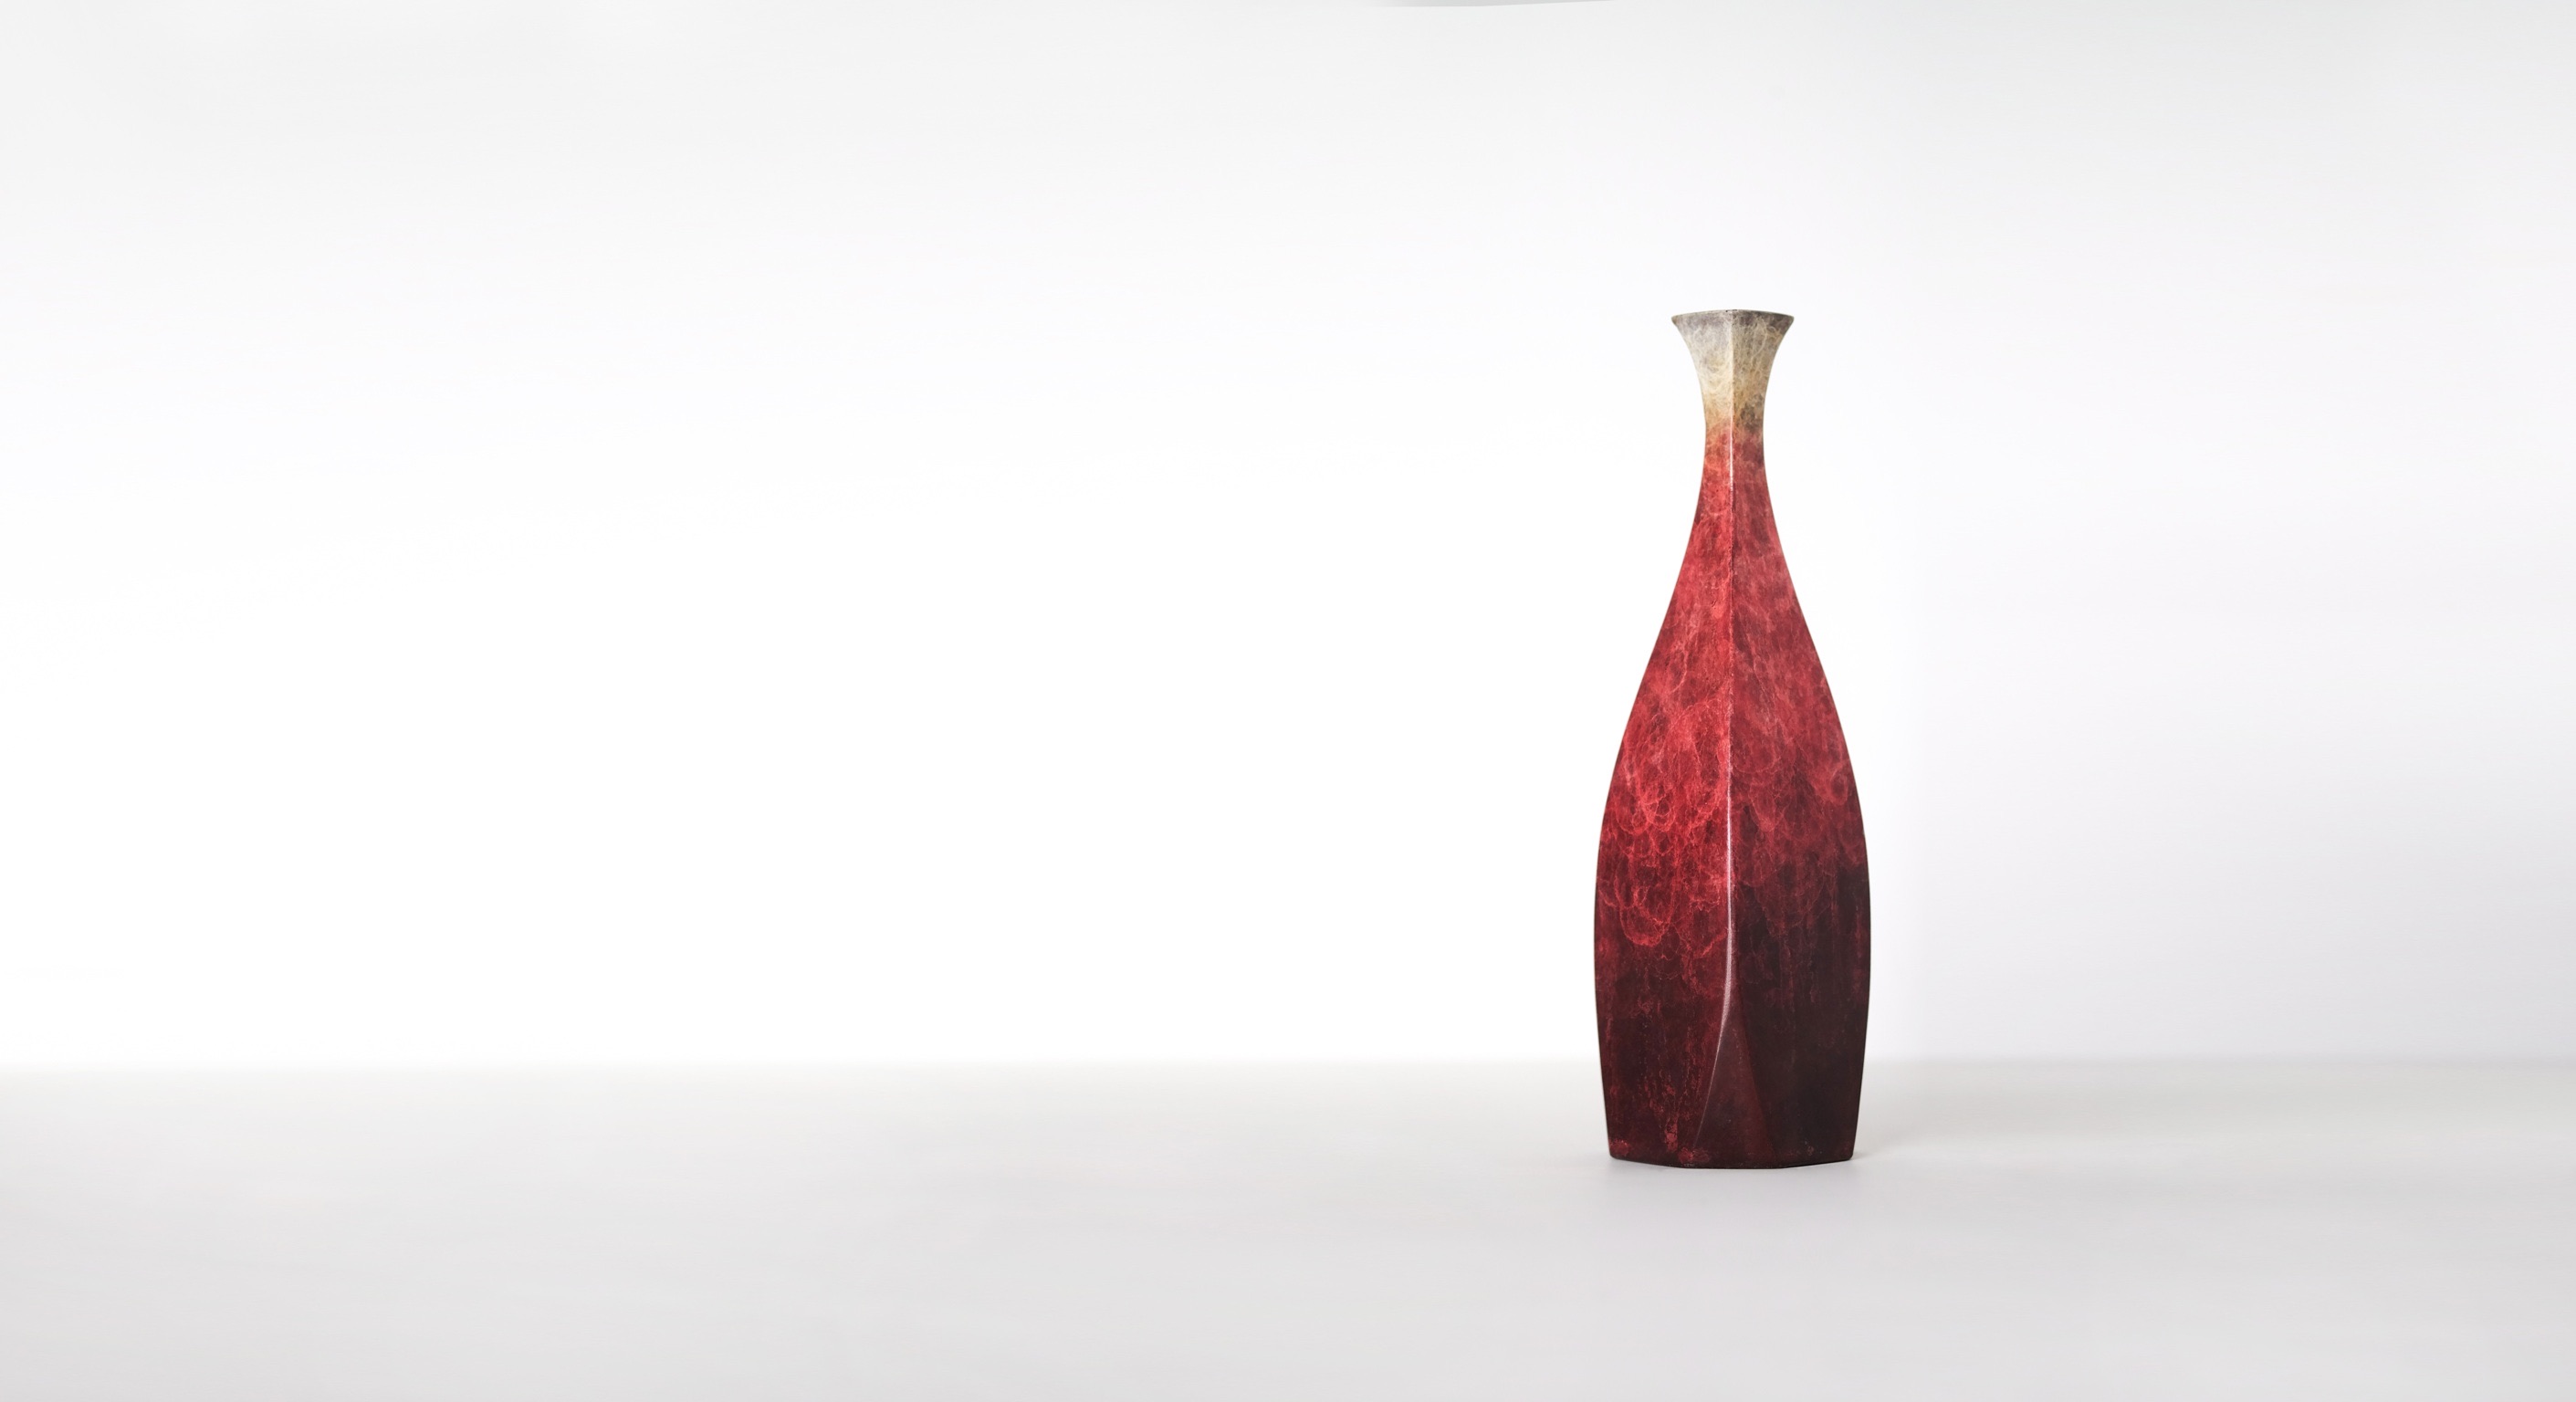 Copper Abstract Red Vase Simple Background 2822x1536